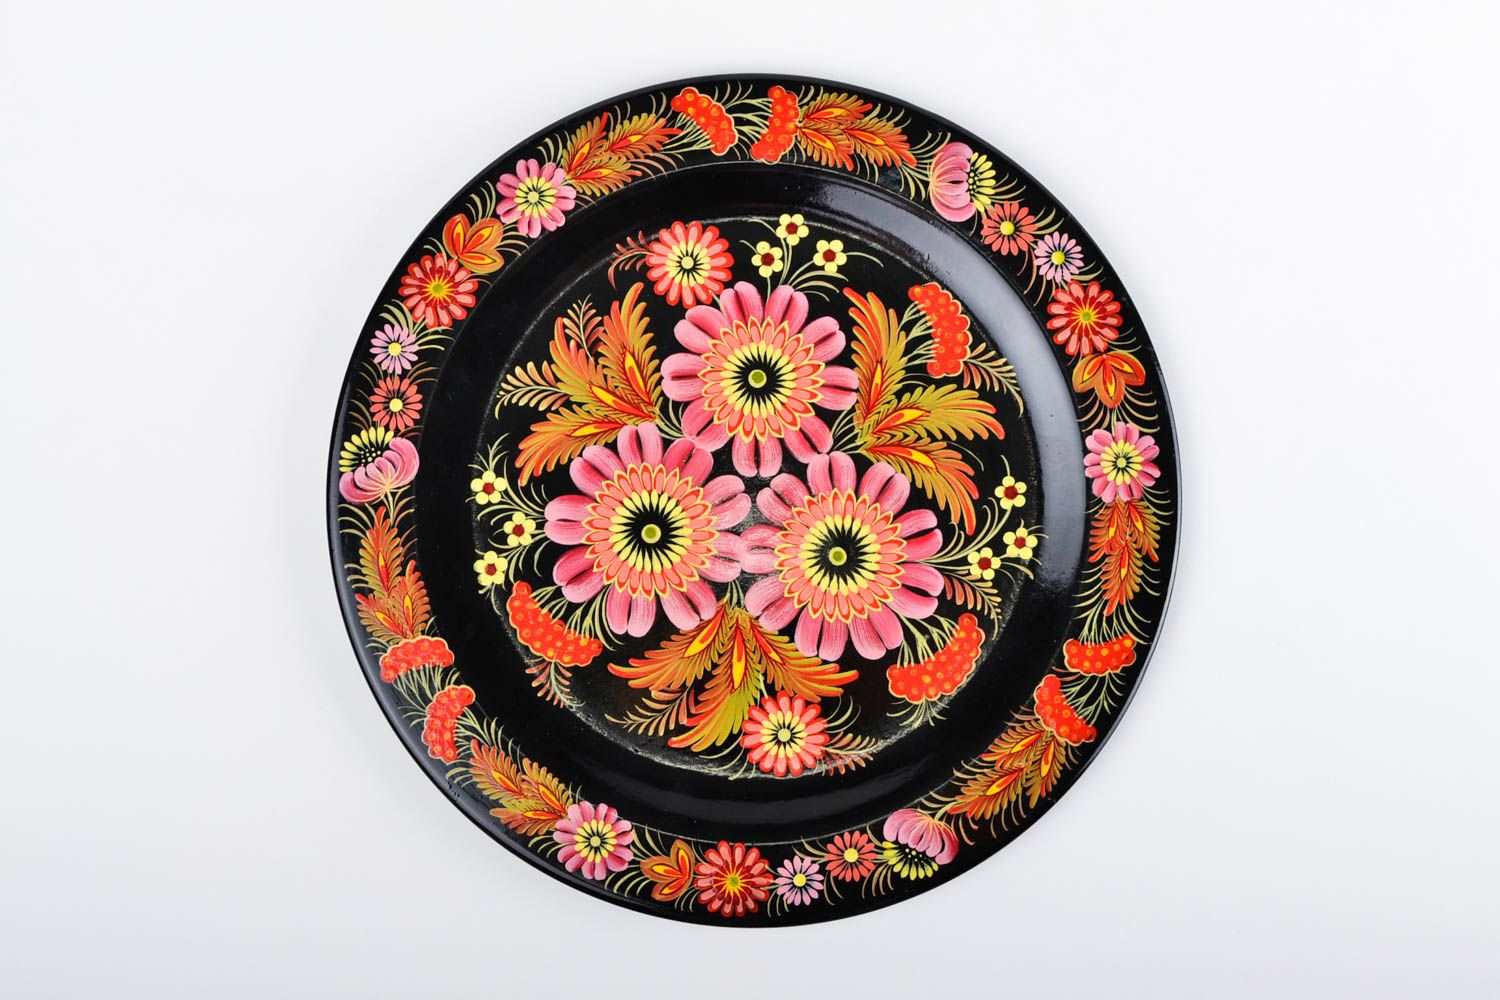 Handmade wood plate painted plate for decorative use only souvenir ideas photo 4